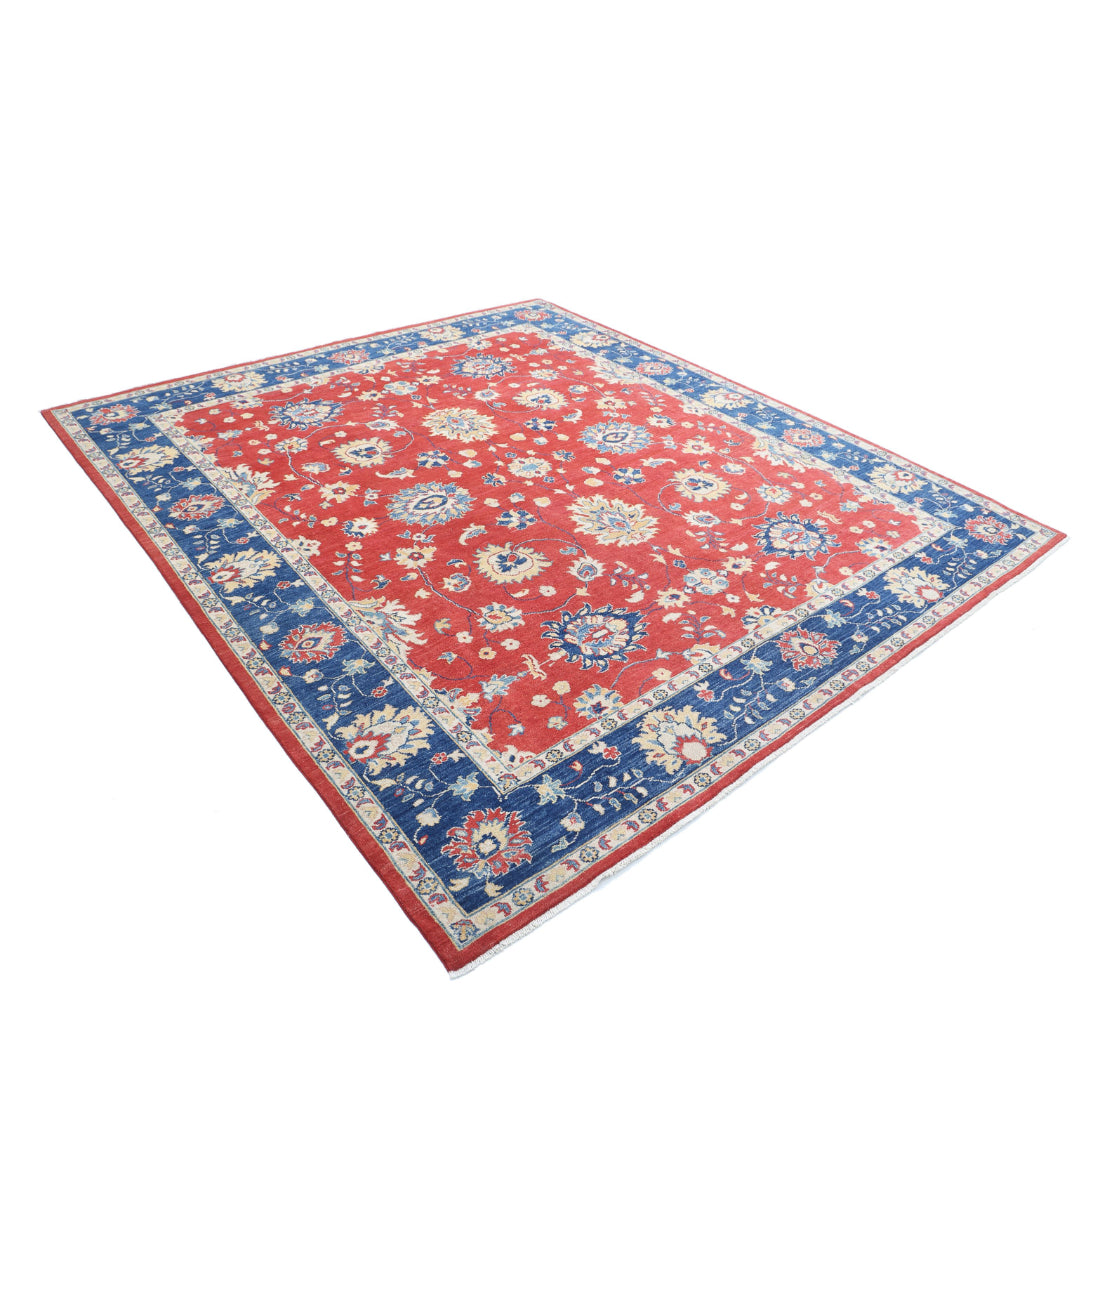 Ziegler 8'4'' X 9'4'' Hand-Knotted Wool Rug 8'4'' x 9'4'' (250 X 280) / Red / Blue